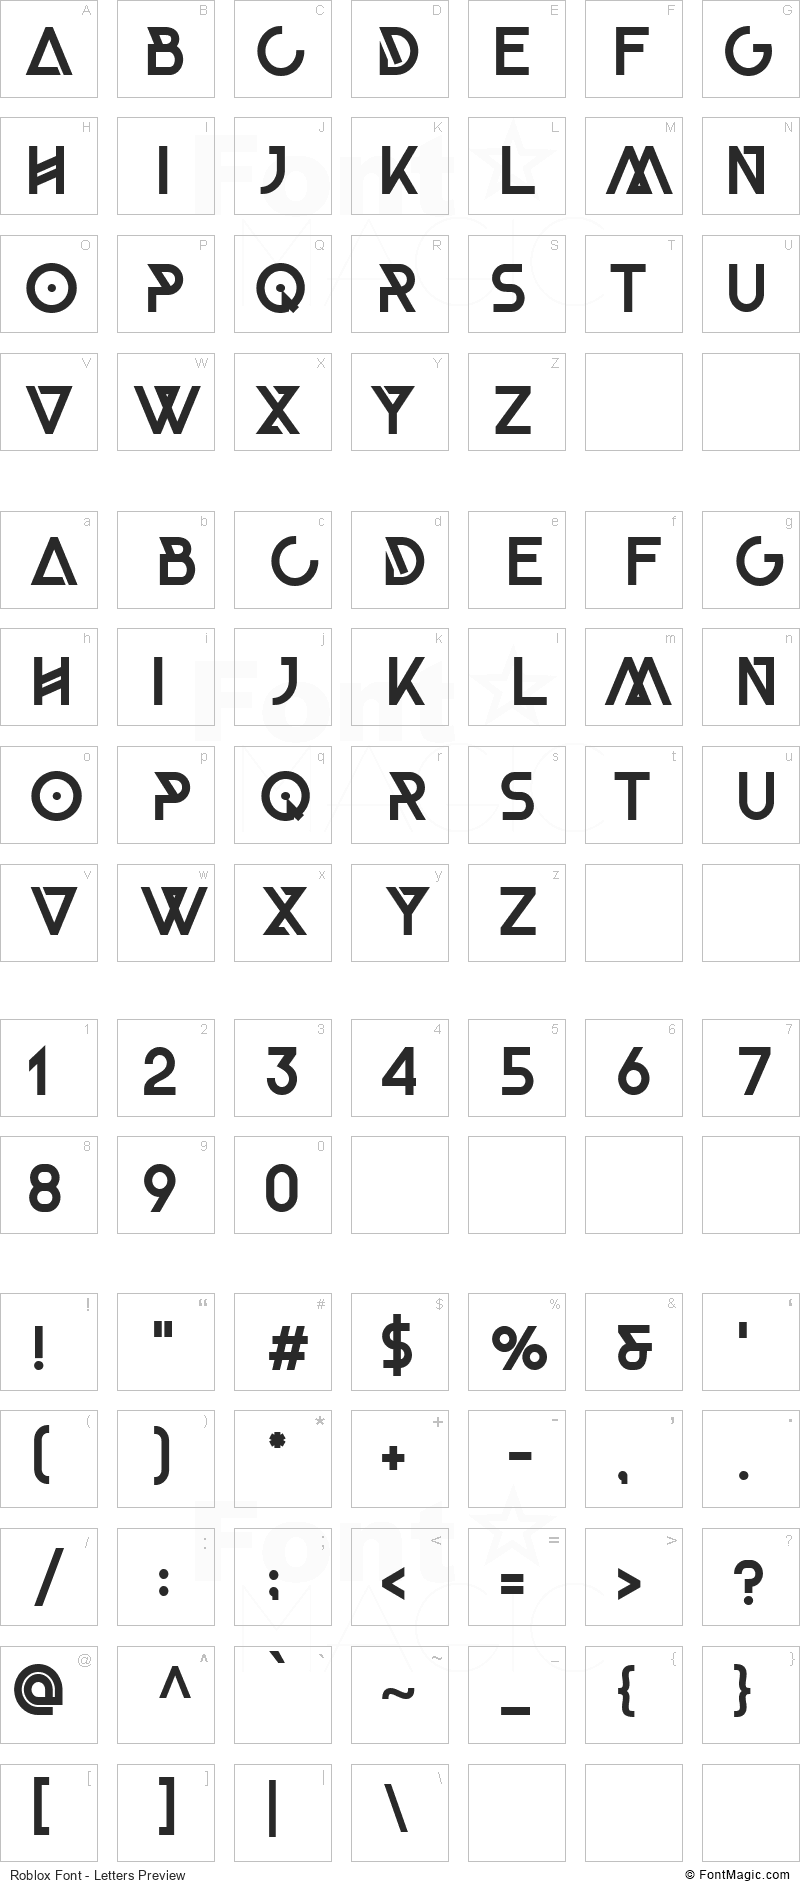 Roblox Font - All Latters Preview Chart